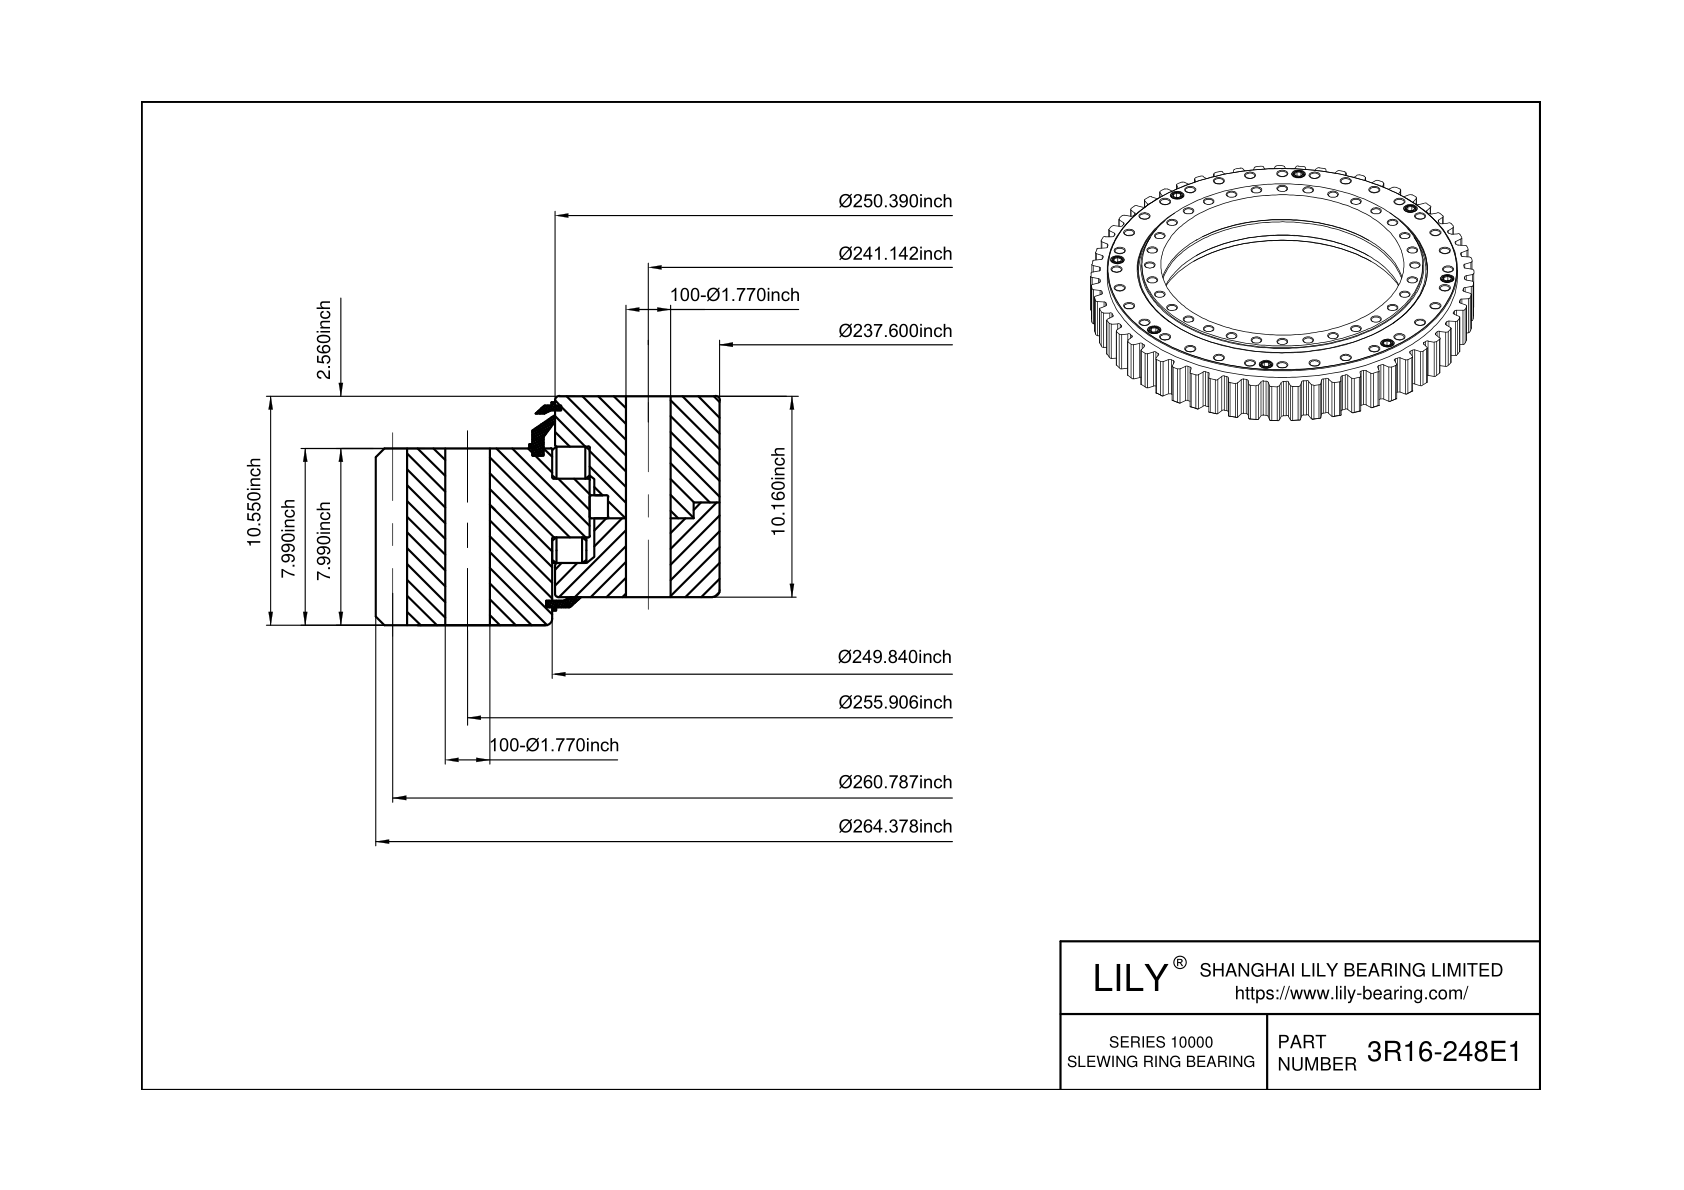 3R16-248E1 Three-Row Cross Roller Slewing Ring Bearing cad drawing